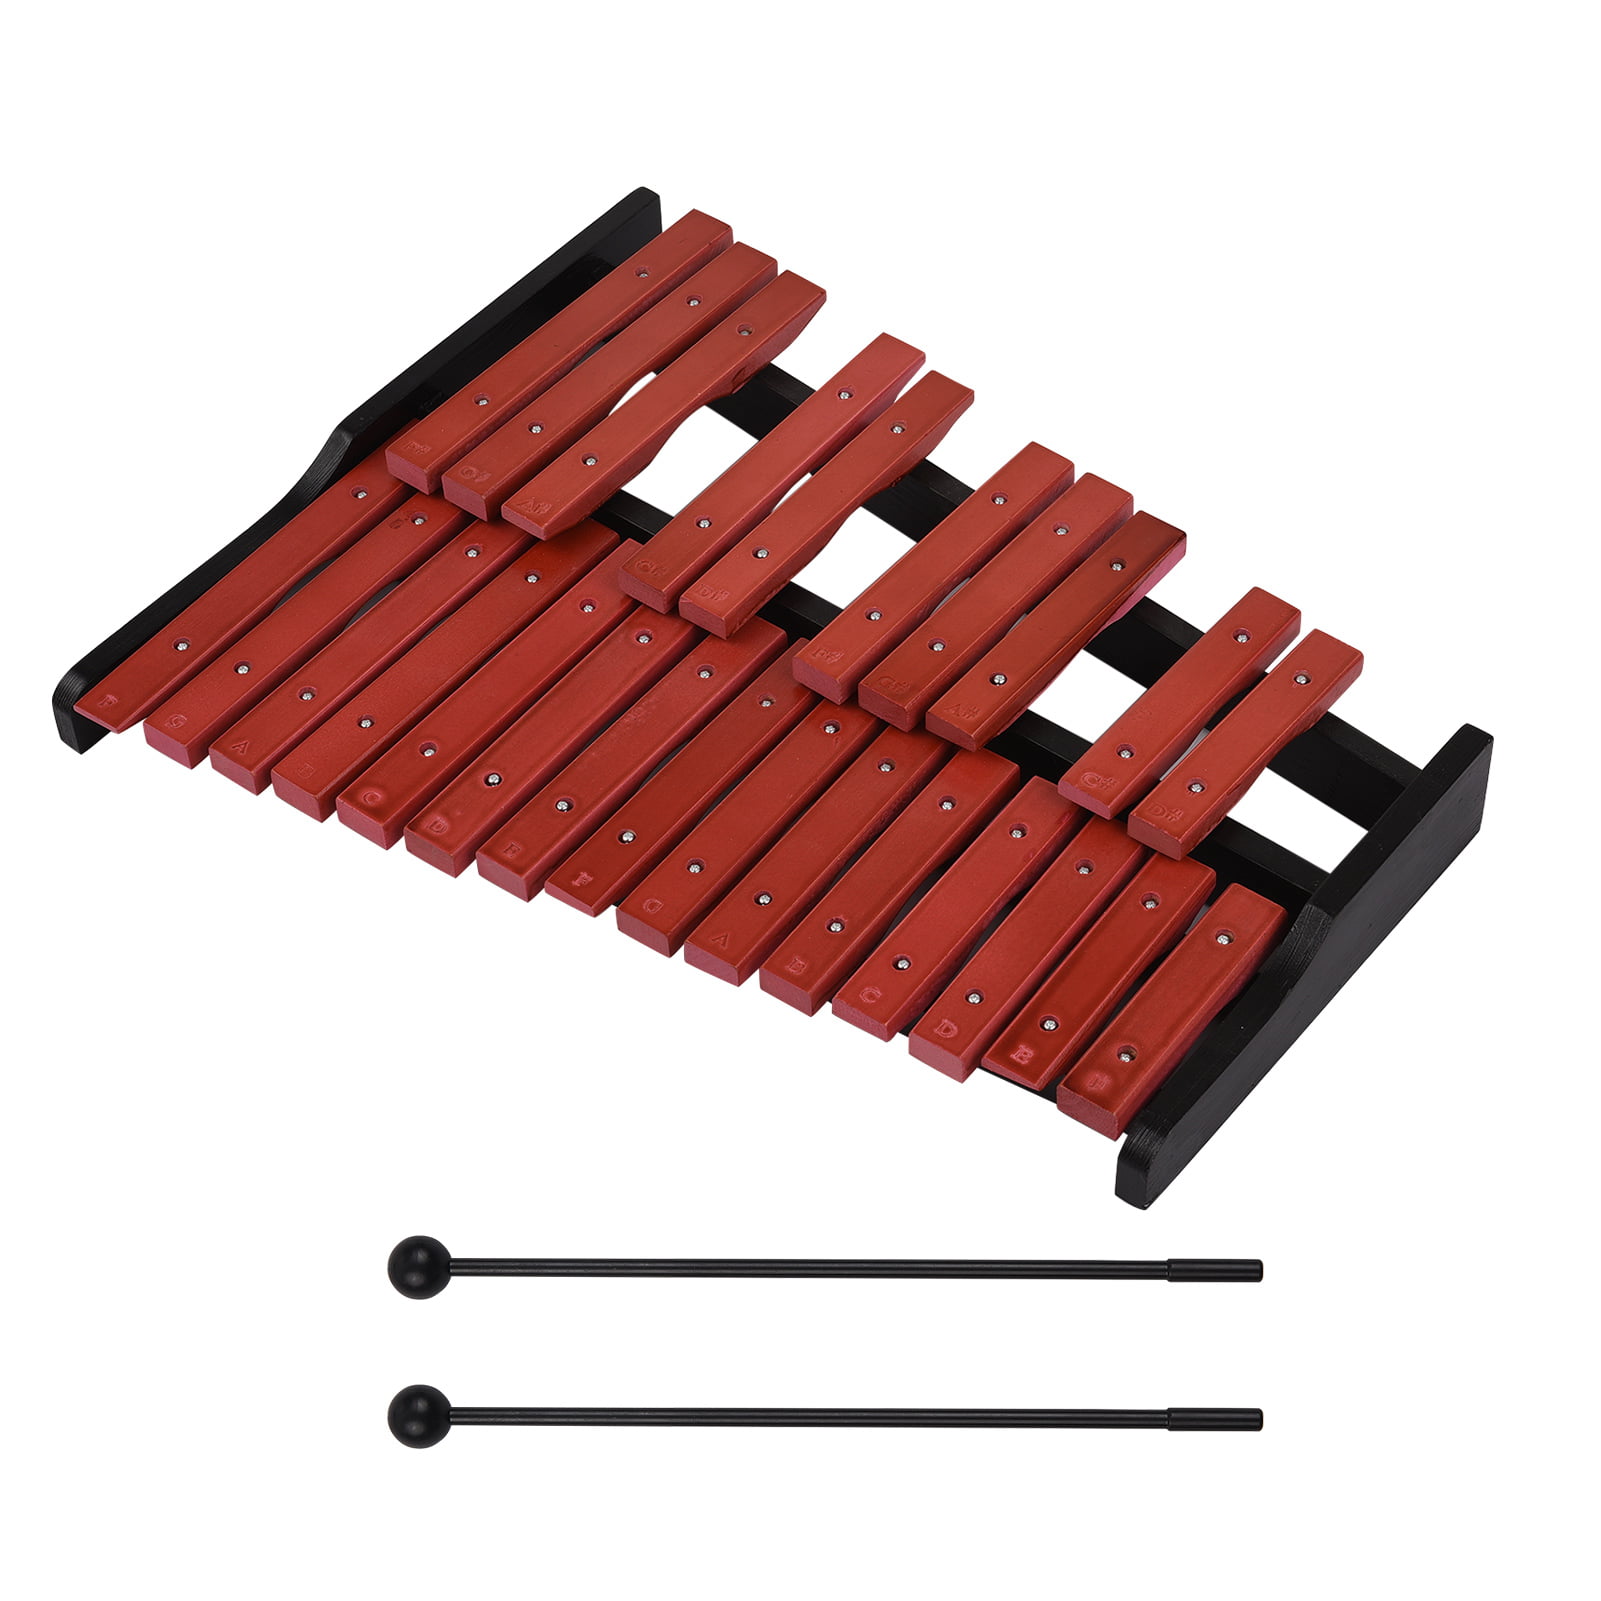 Sirao Xylophone 25 Note Wooden Percussion Educational Musical Instrument Gift with 2 Mallets and Suitcase,Professional Glockenspiel for Adults and Kids 